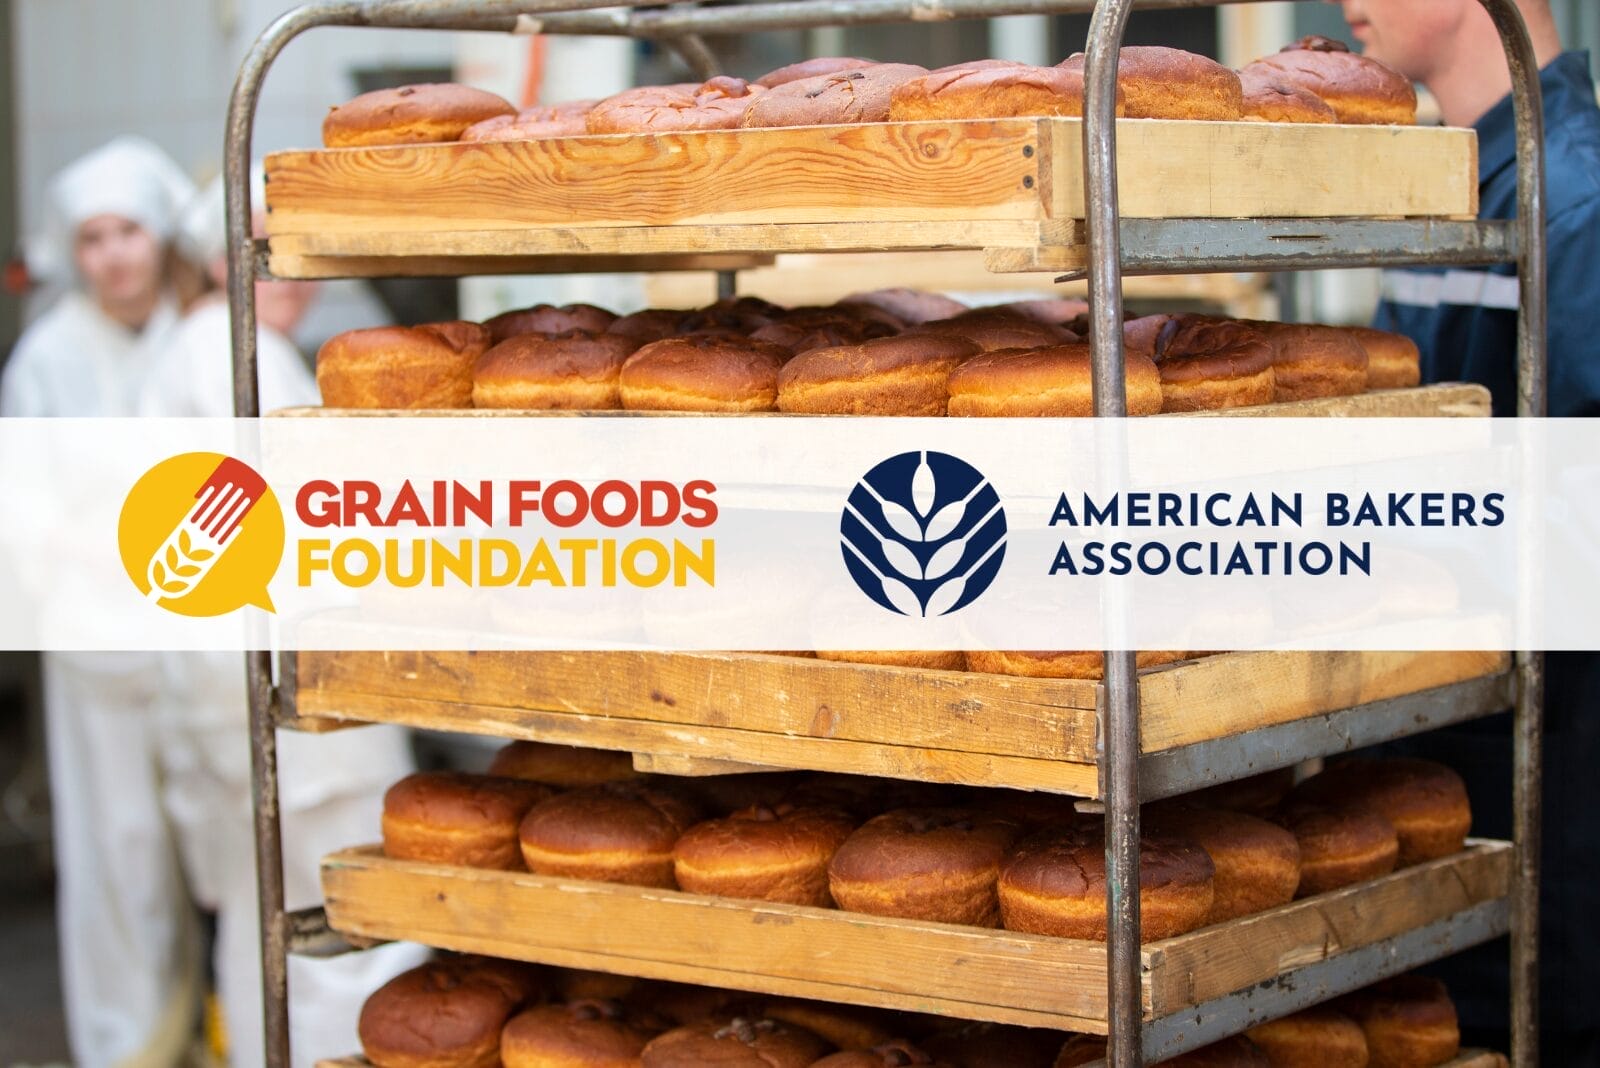 Grain Foods Foundation and American Bakers Association logos on top of background image of bakers standing around rack of freshly baked bread loaves